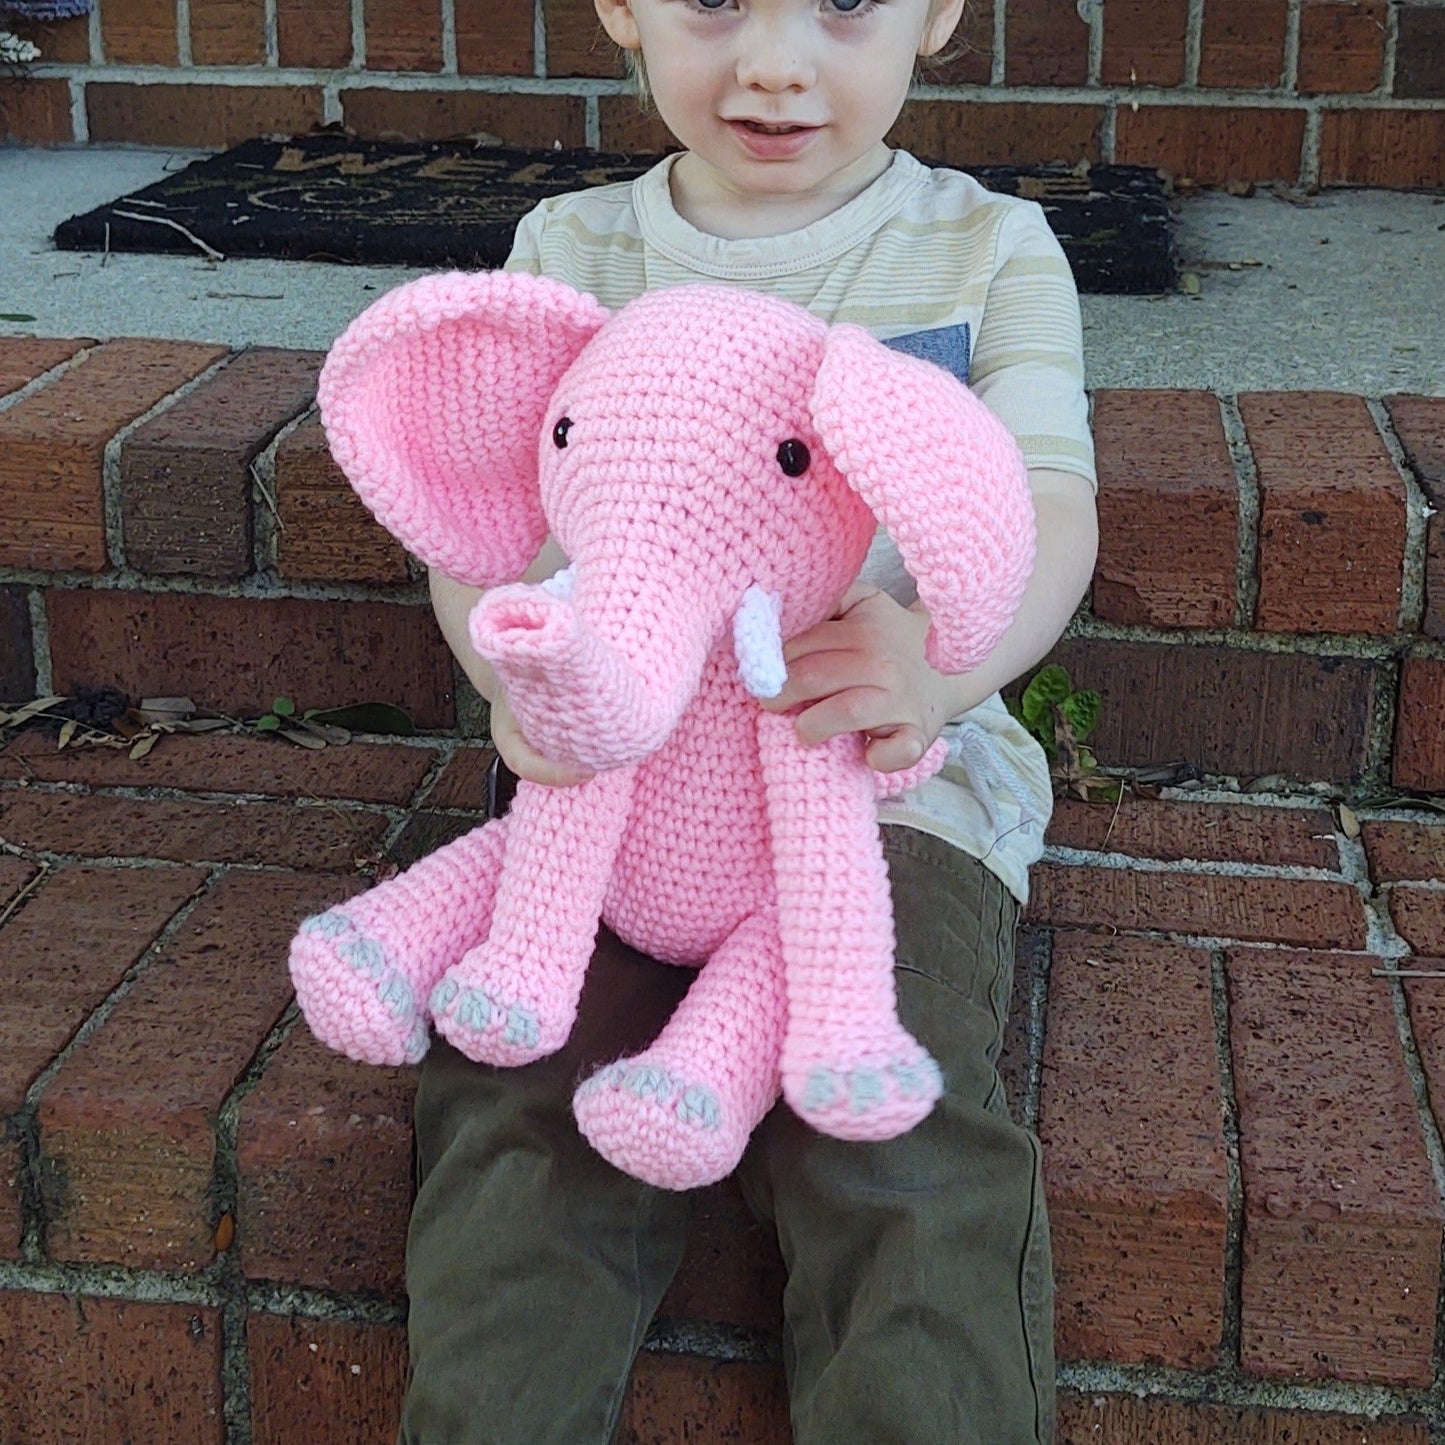 Pink Elephant in a childs arms. This is a large elephant